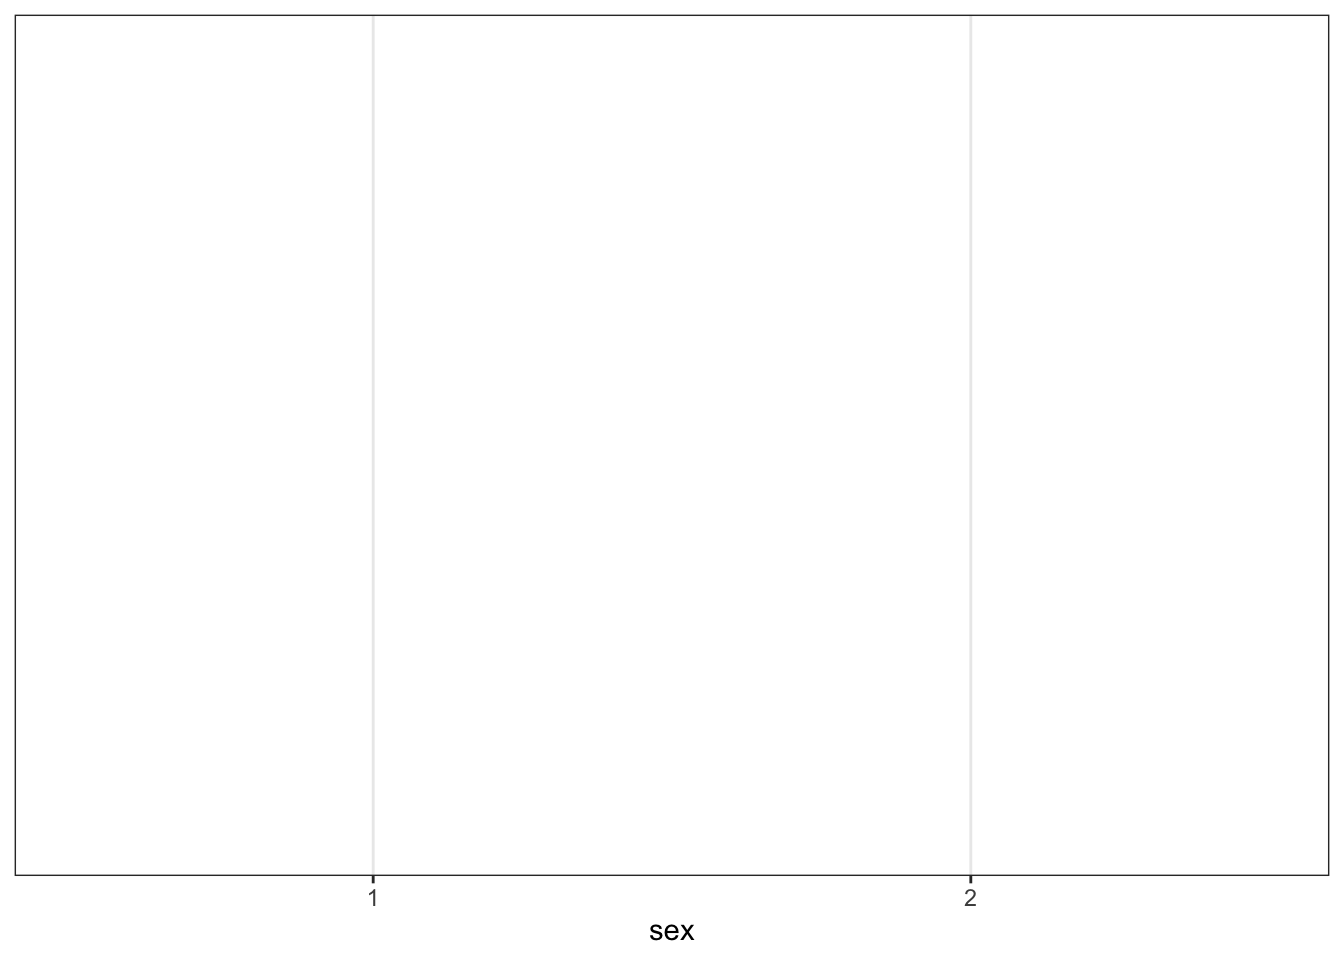 First ggplot layer sets the axes